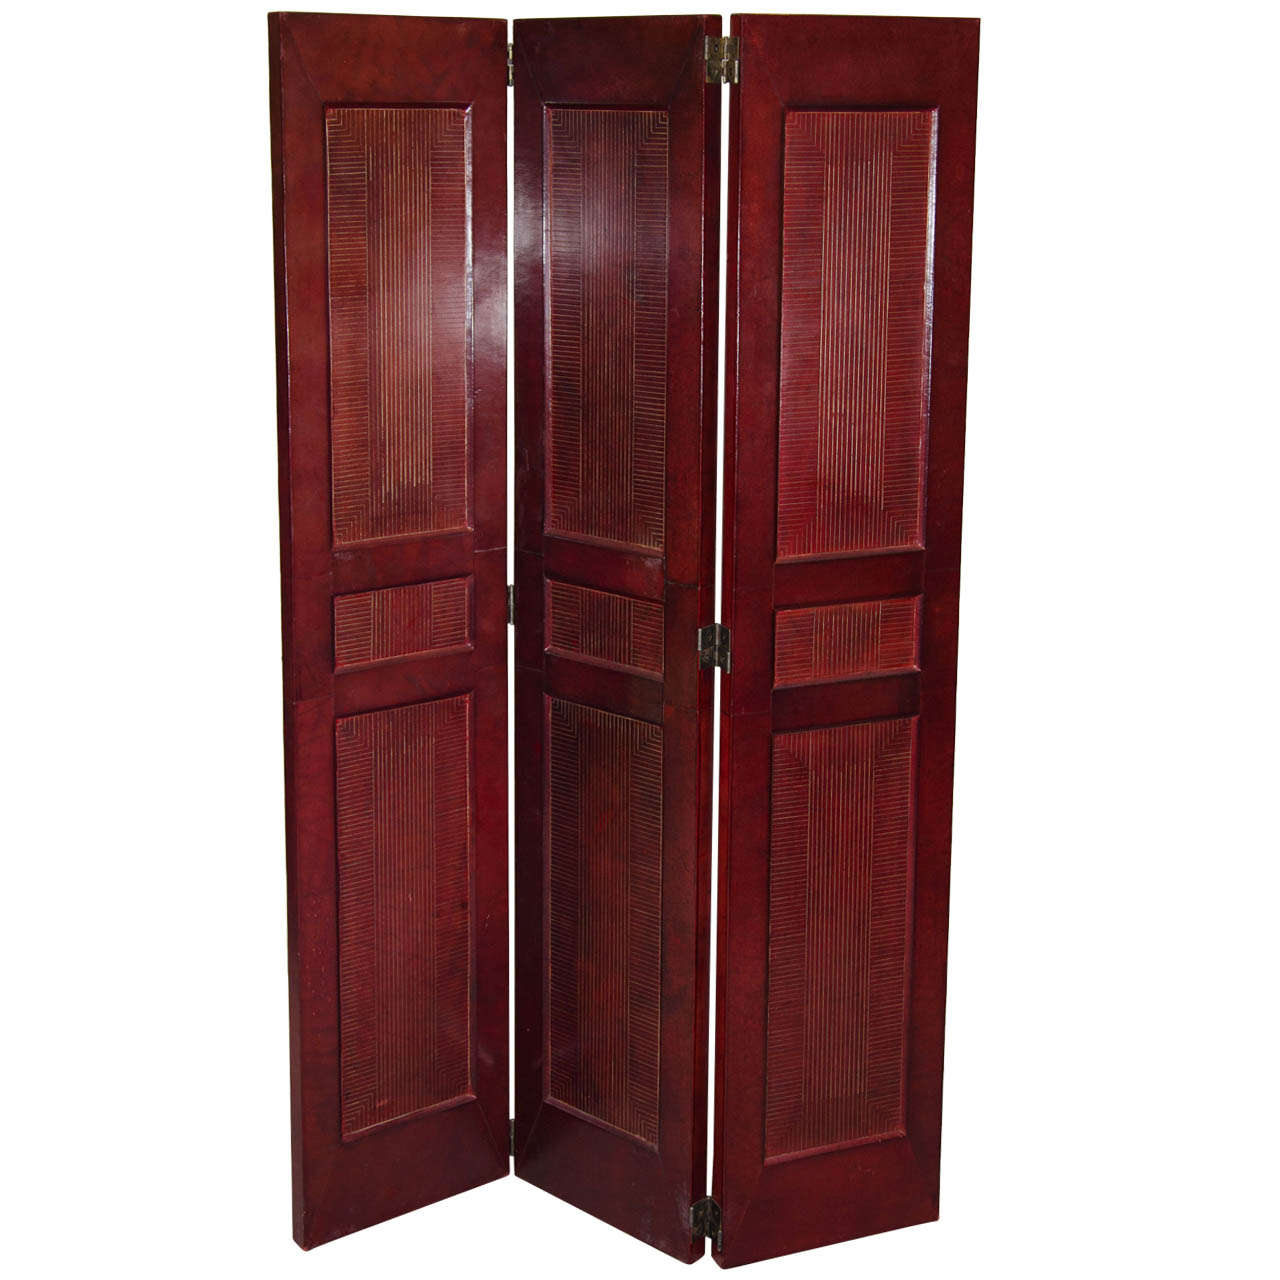 A vintage pair of leather screens or room dividers hand dipped in ox blood red.  Each panel measures 61